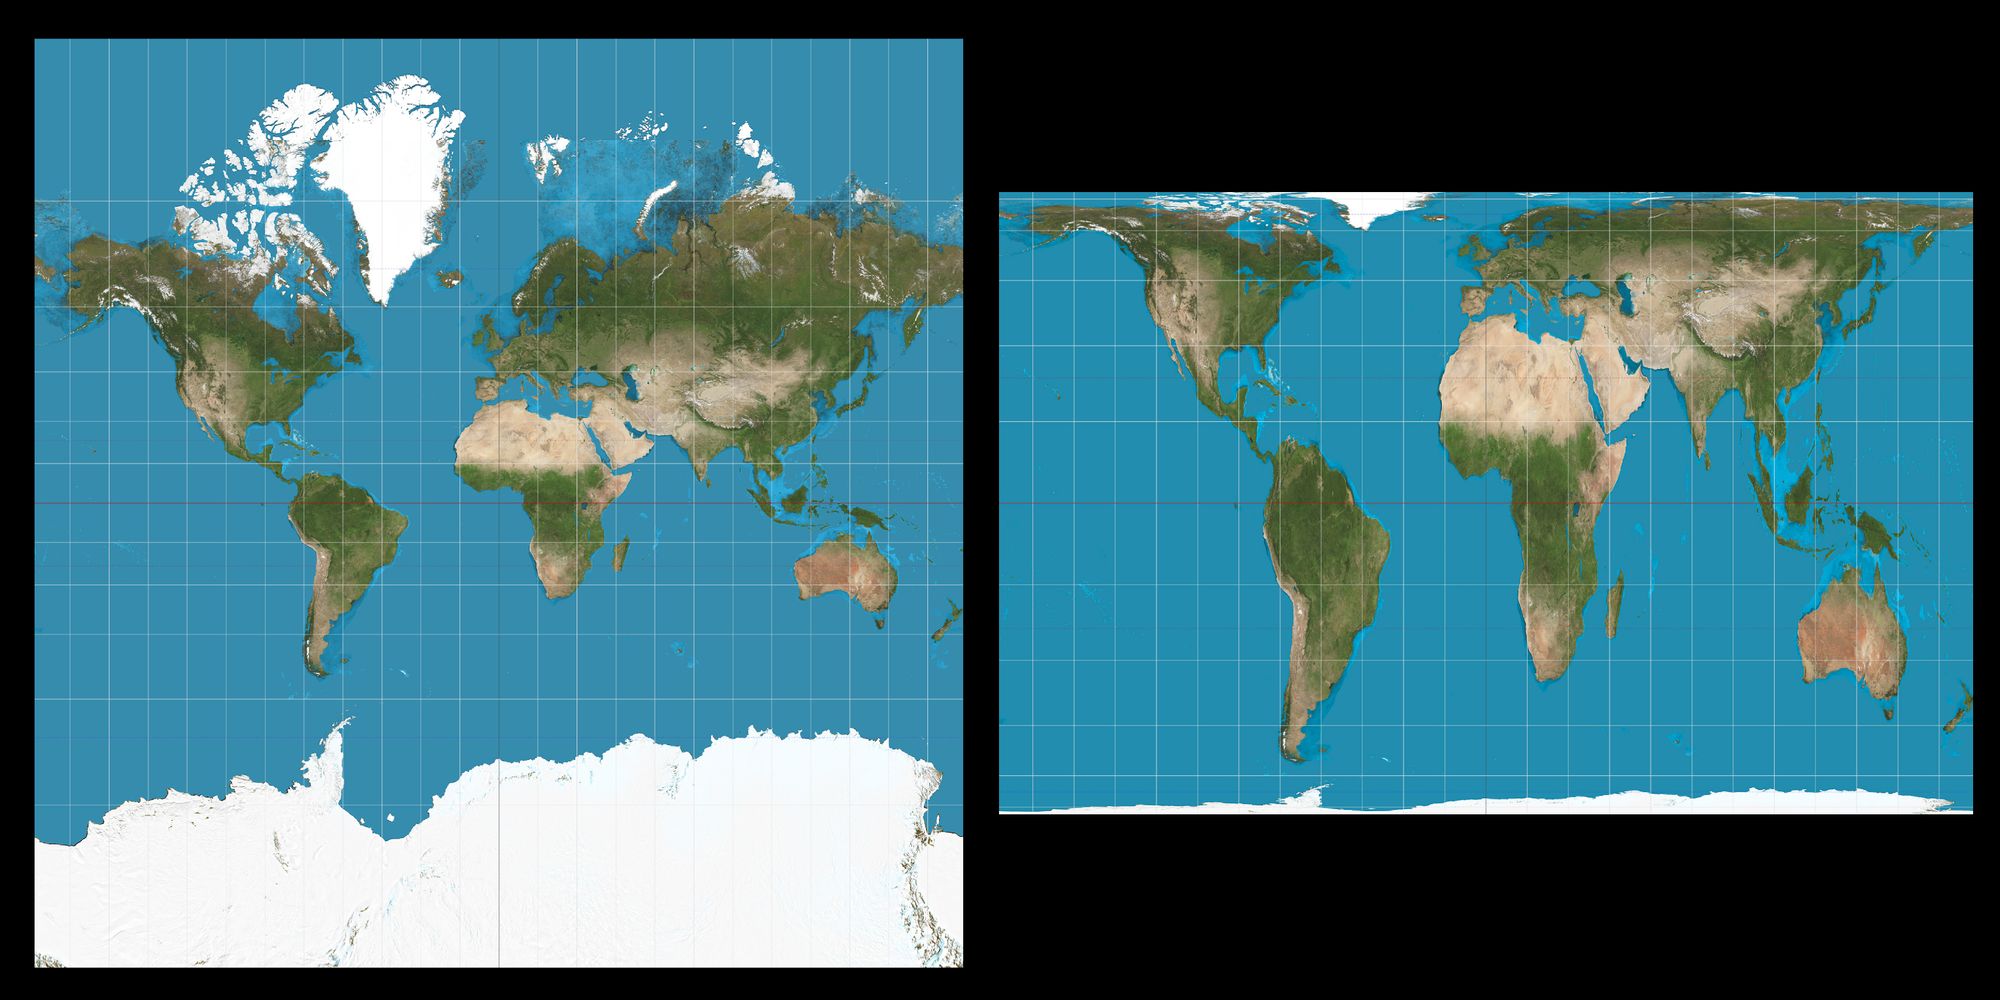 mercator projection vs peters projection